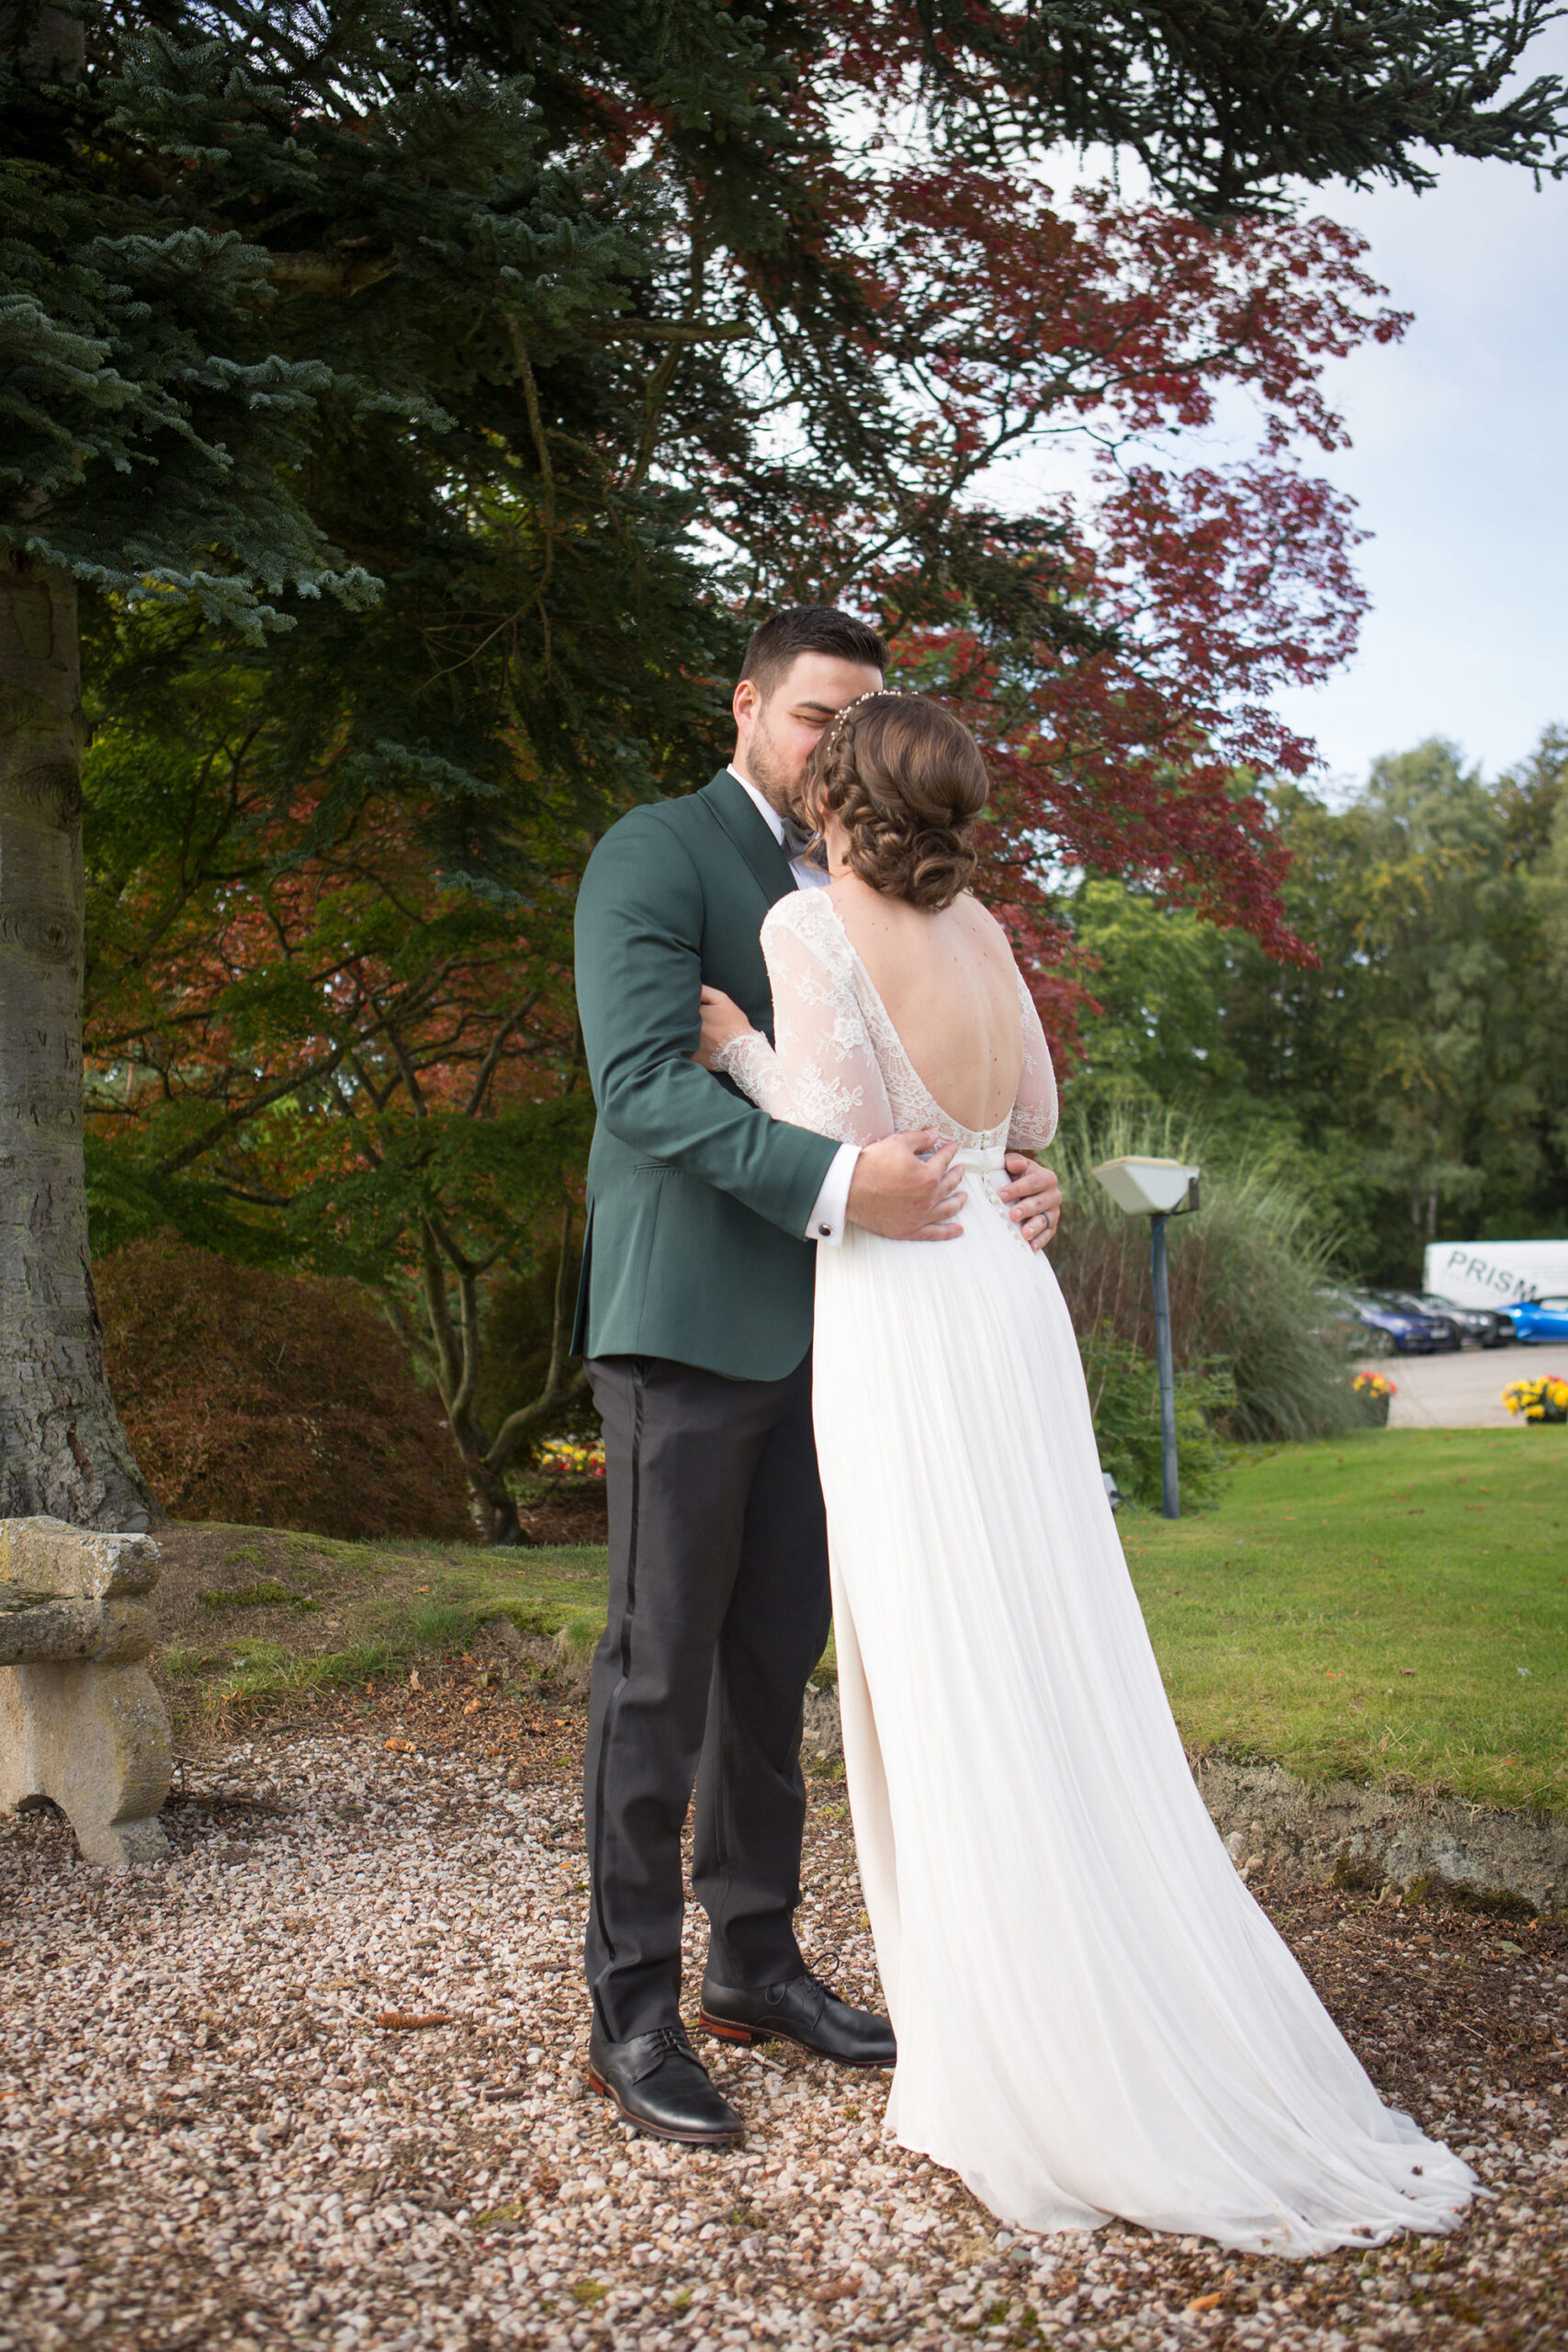 Emily Bill Scotland Elopement Wedding Alison White Photography SBS 014 scaled